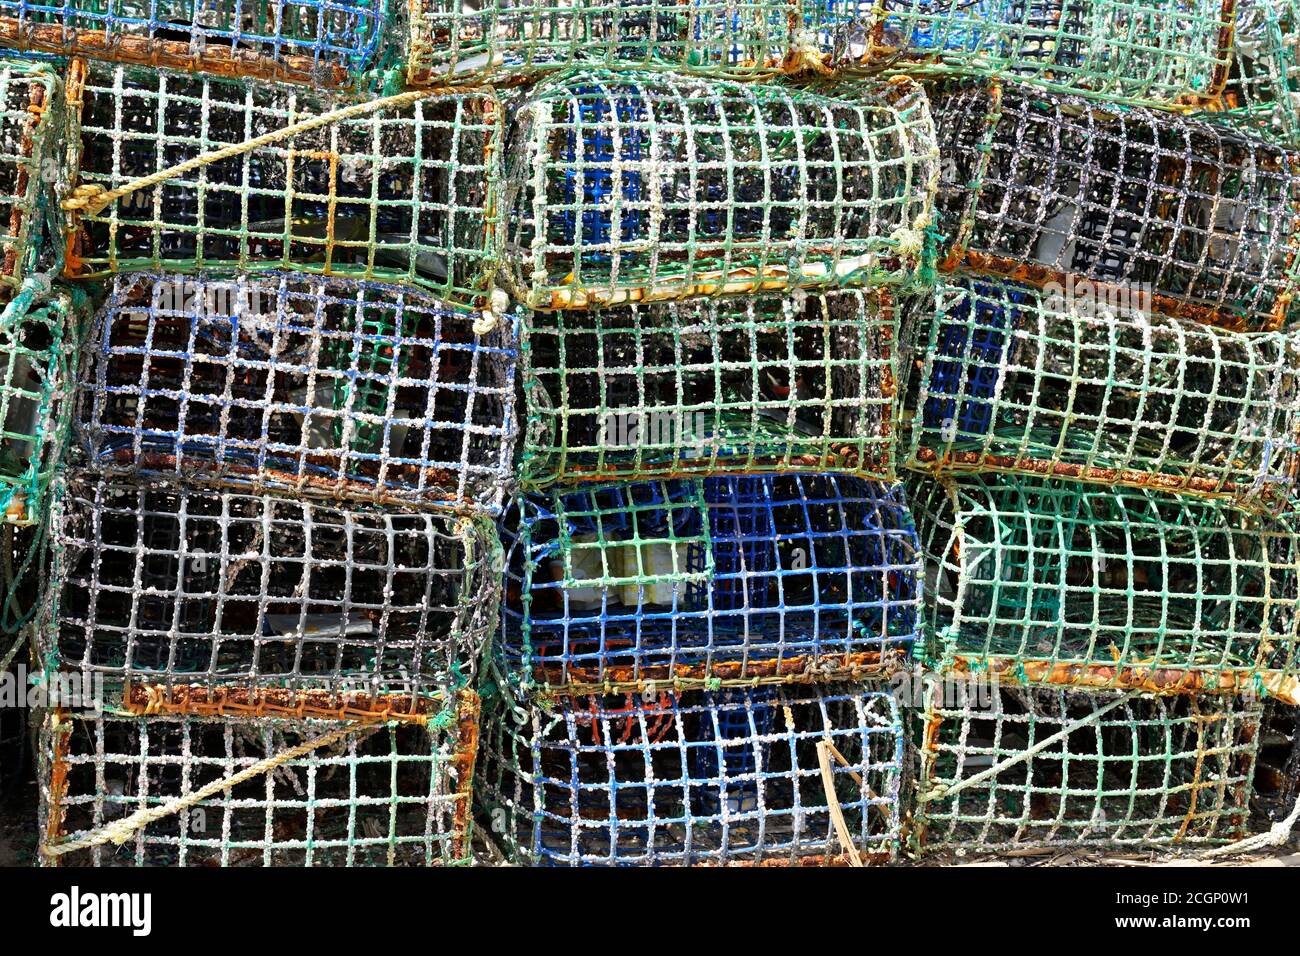 Basket fish traps for crab and lobster fishing in the Atlantic Ocean, Alvor fishing harbour, Portimao municipality, Algarve, Portugal Stock Photo